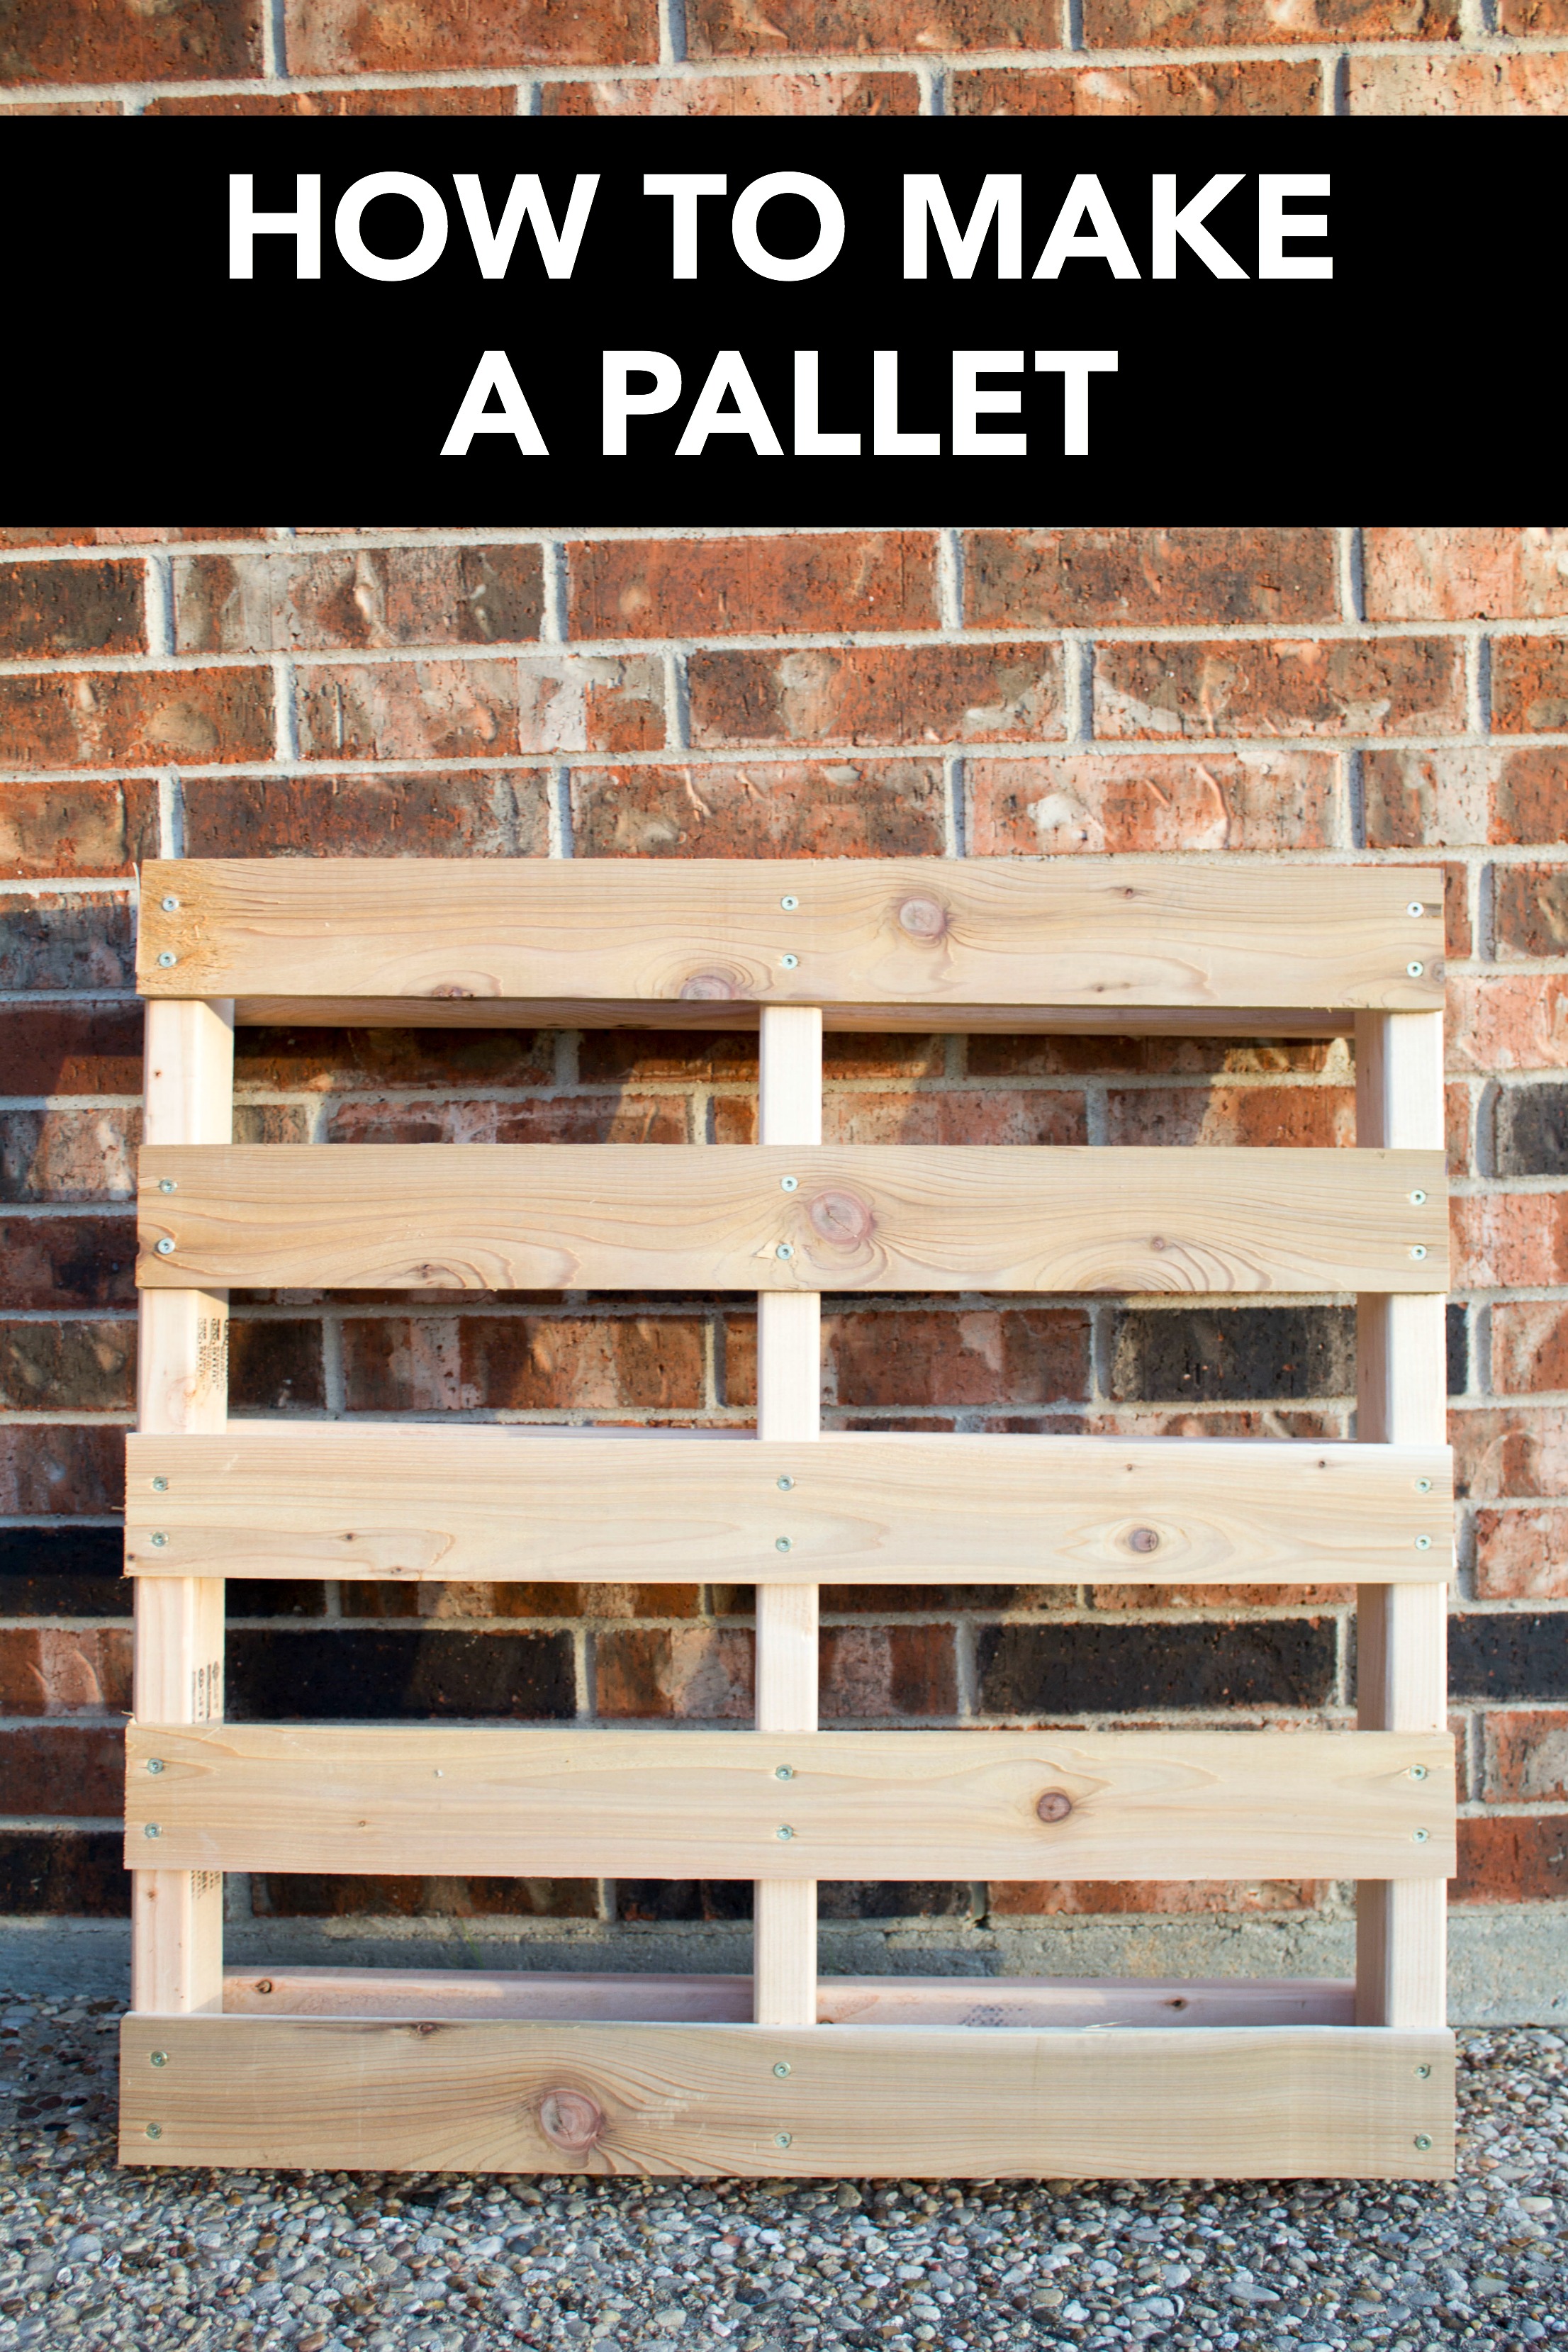 How To Make a Pallet